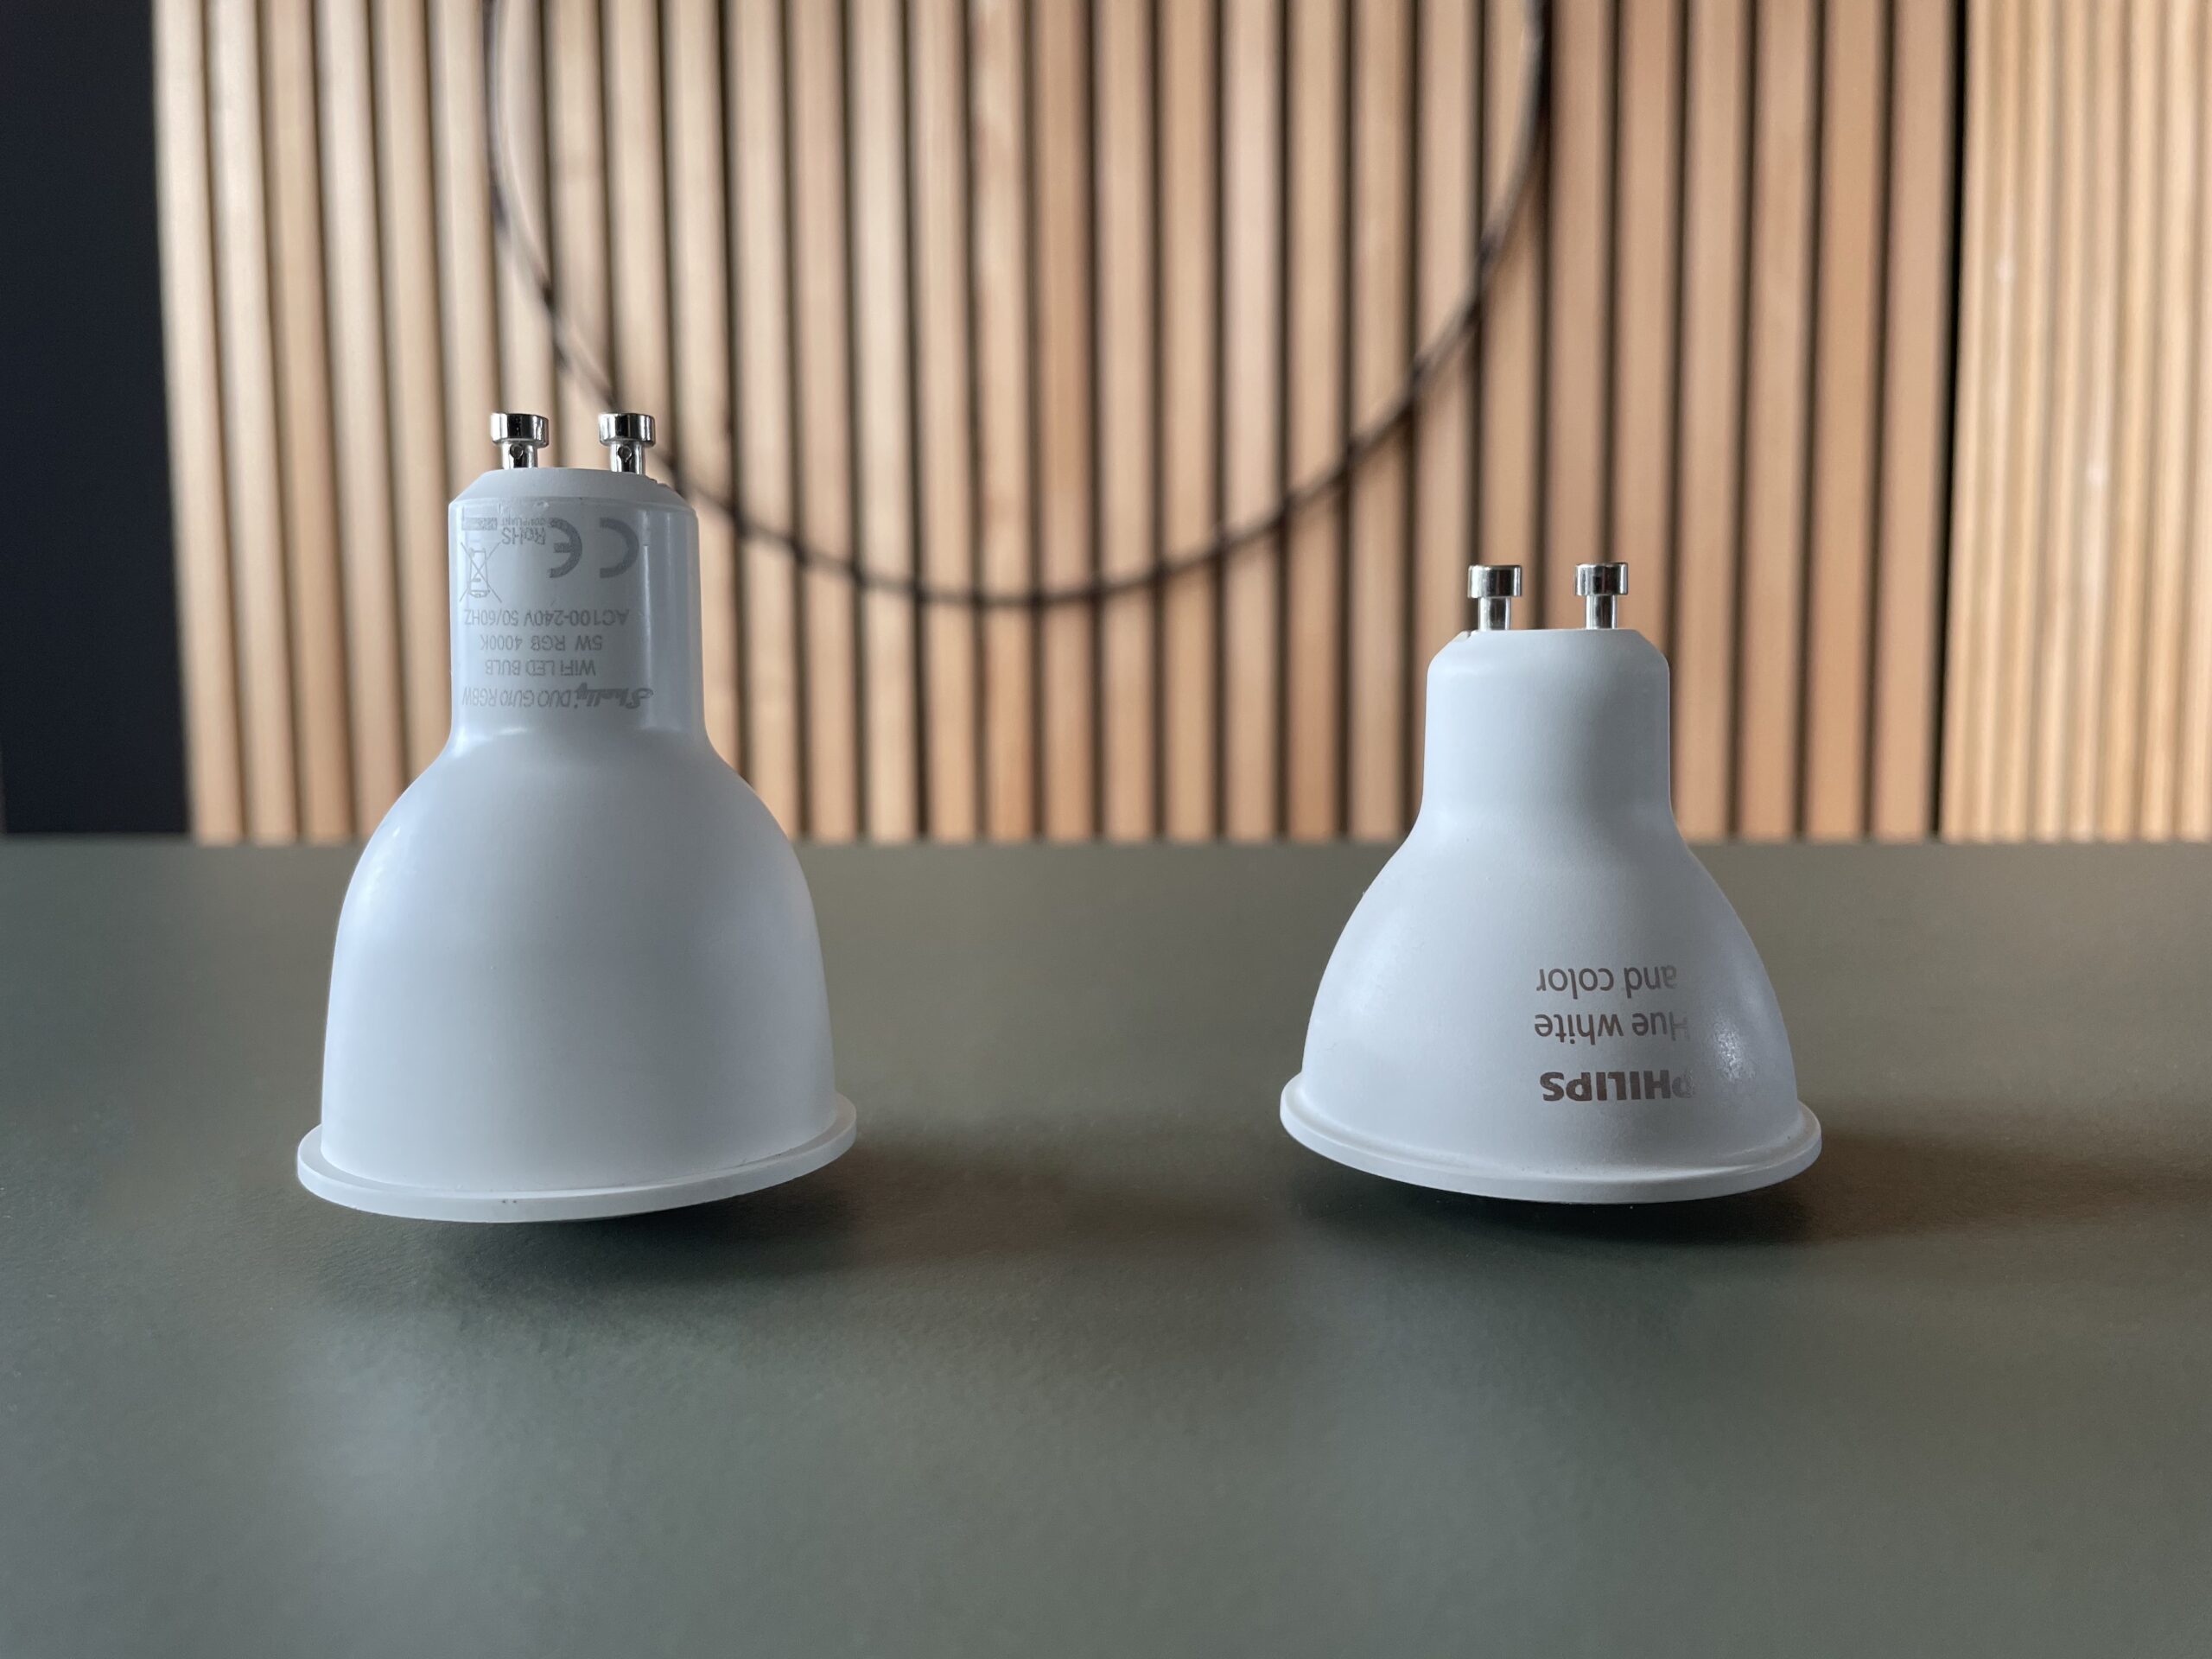 Produktvergleich GU10 Lampen: Philips Hue White & Color Ambience vs. Shelly Duo RGBW